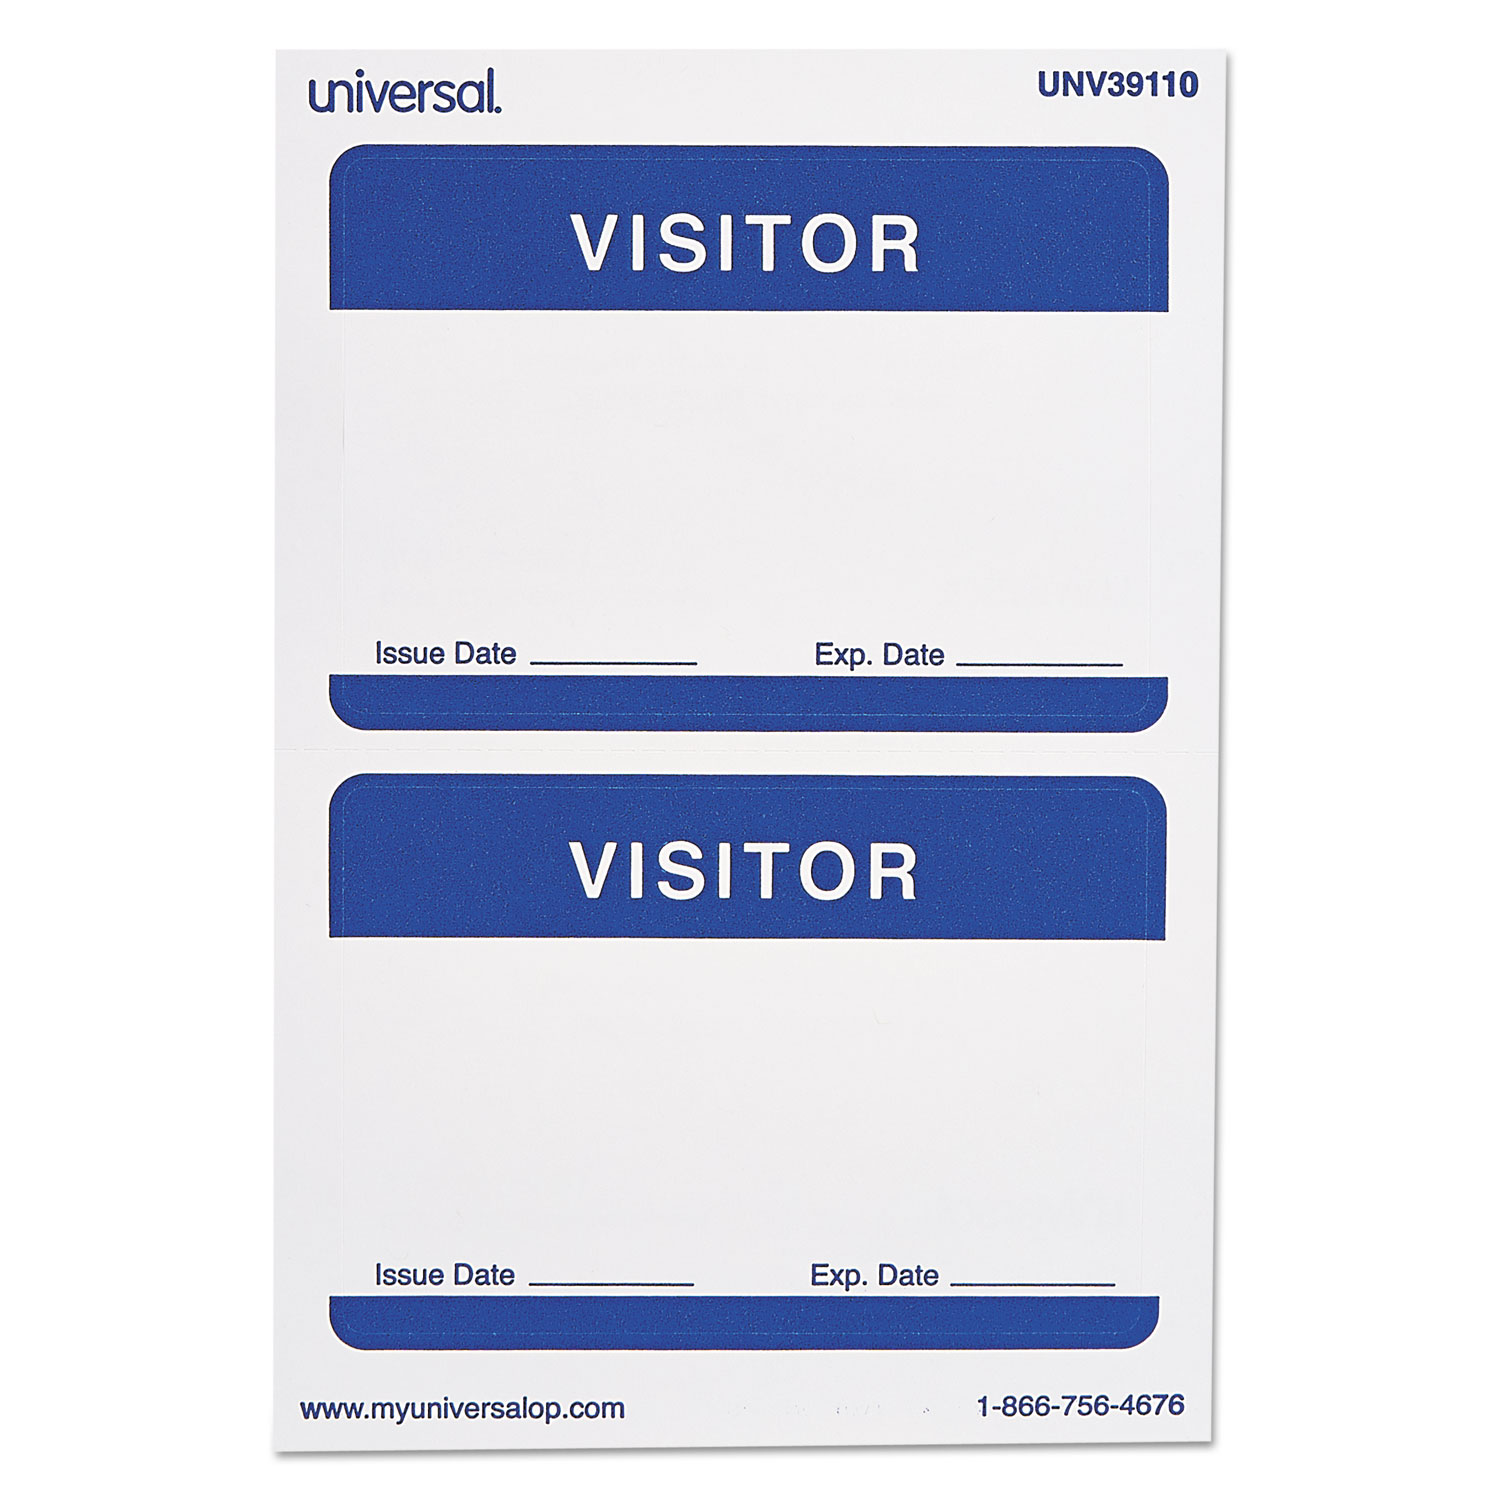 Visitor Self-Adhesive Name Badges, 3 1/2 x 2 1/4, White/Blue, 100/Pack